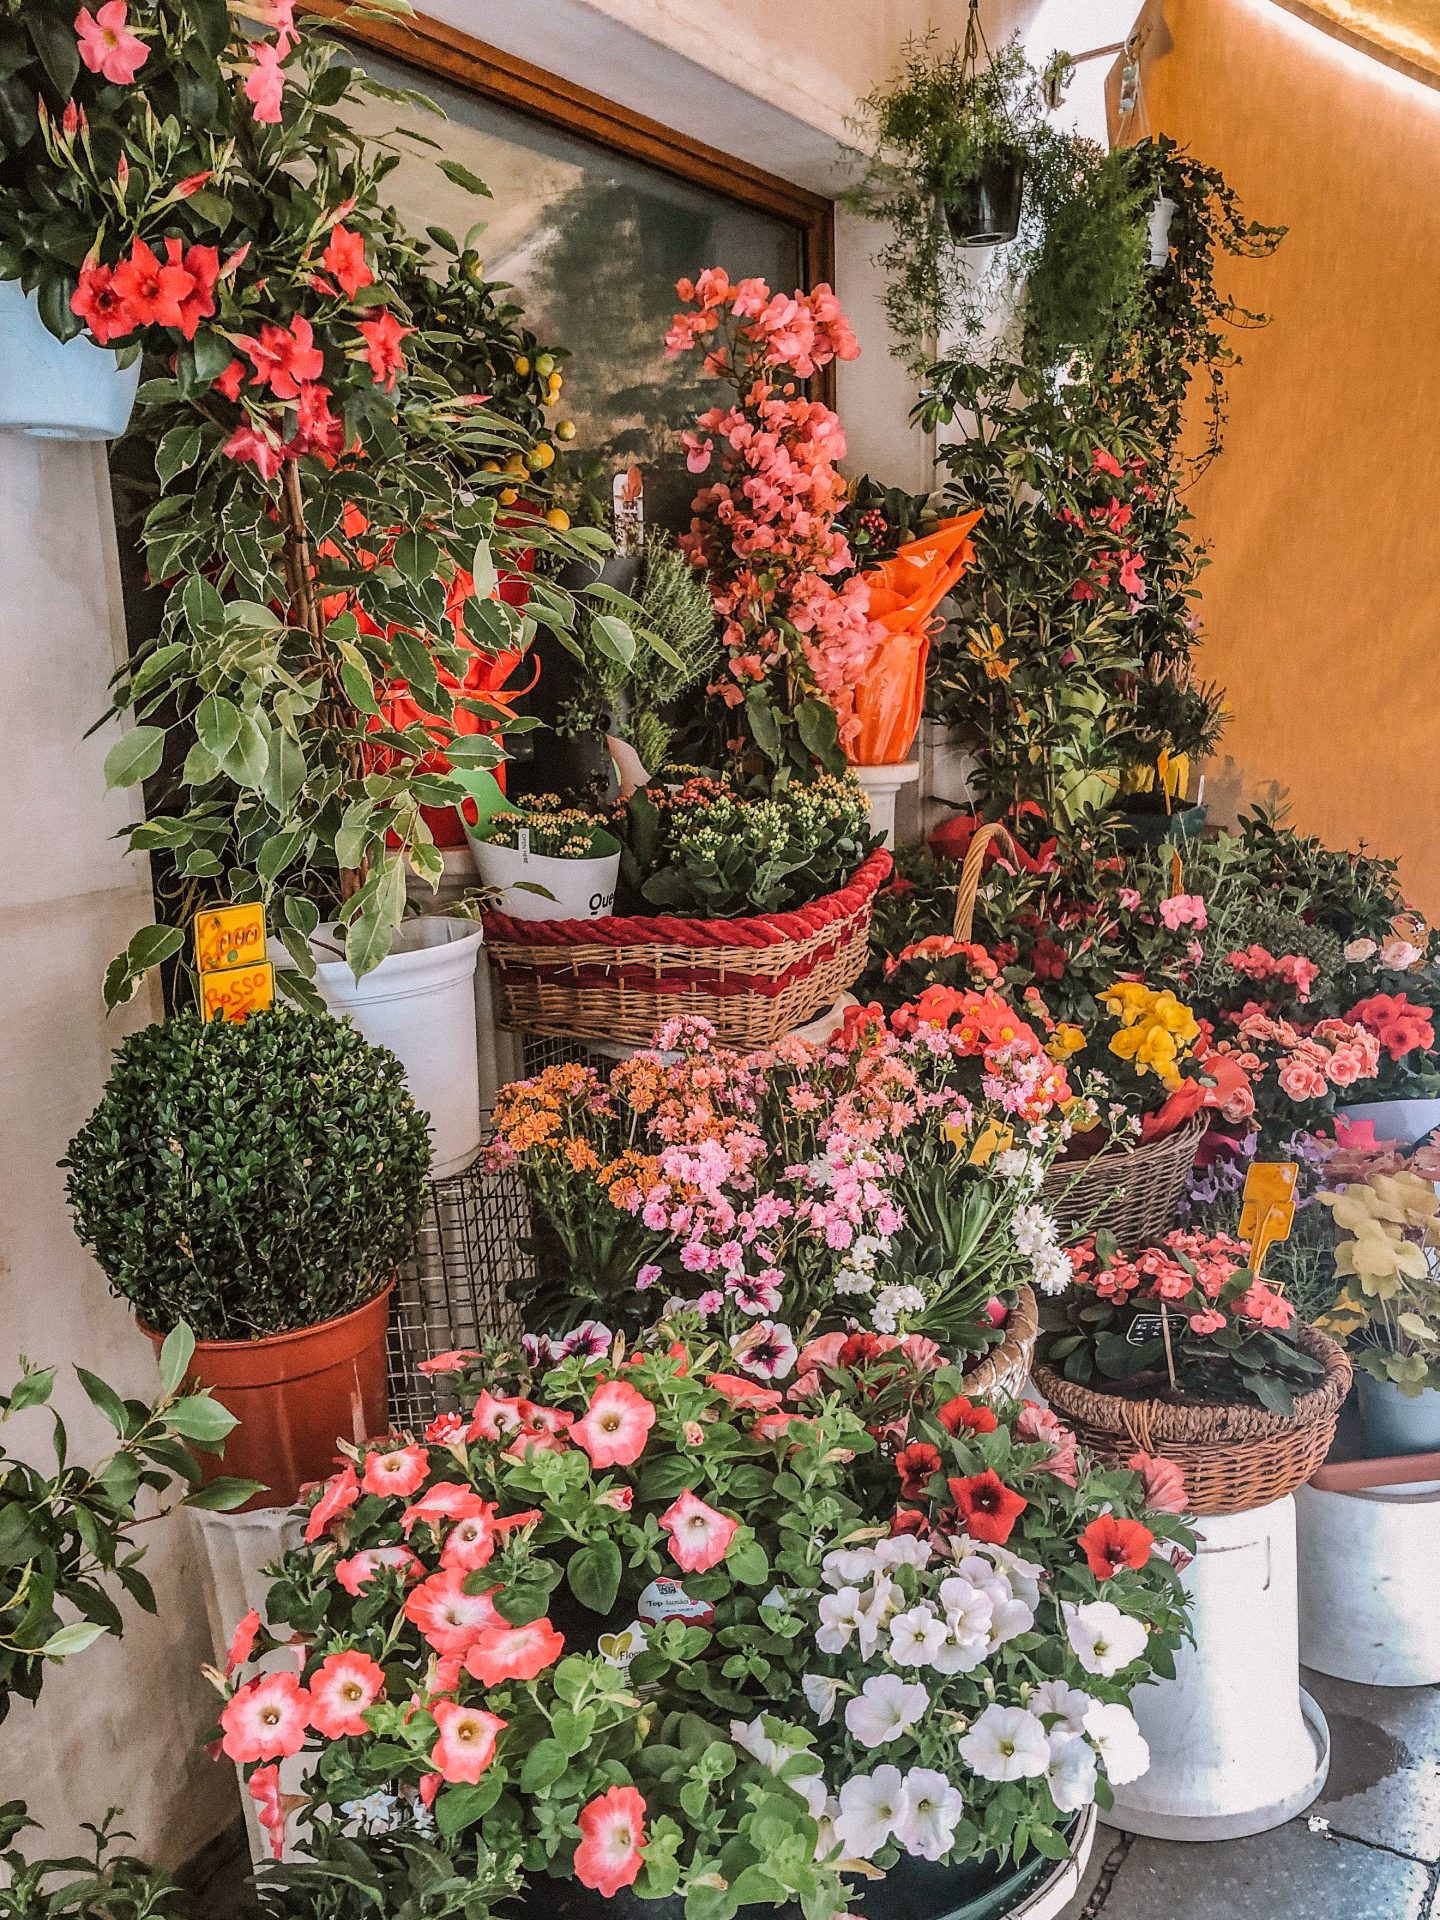 Flowers for sale on sidewalk from shop in Venice, Italy